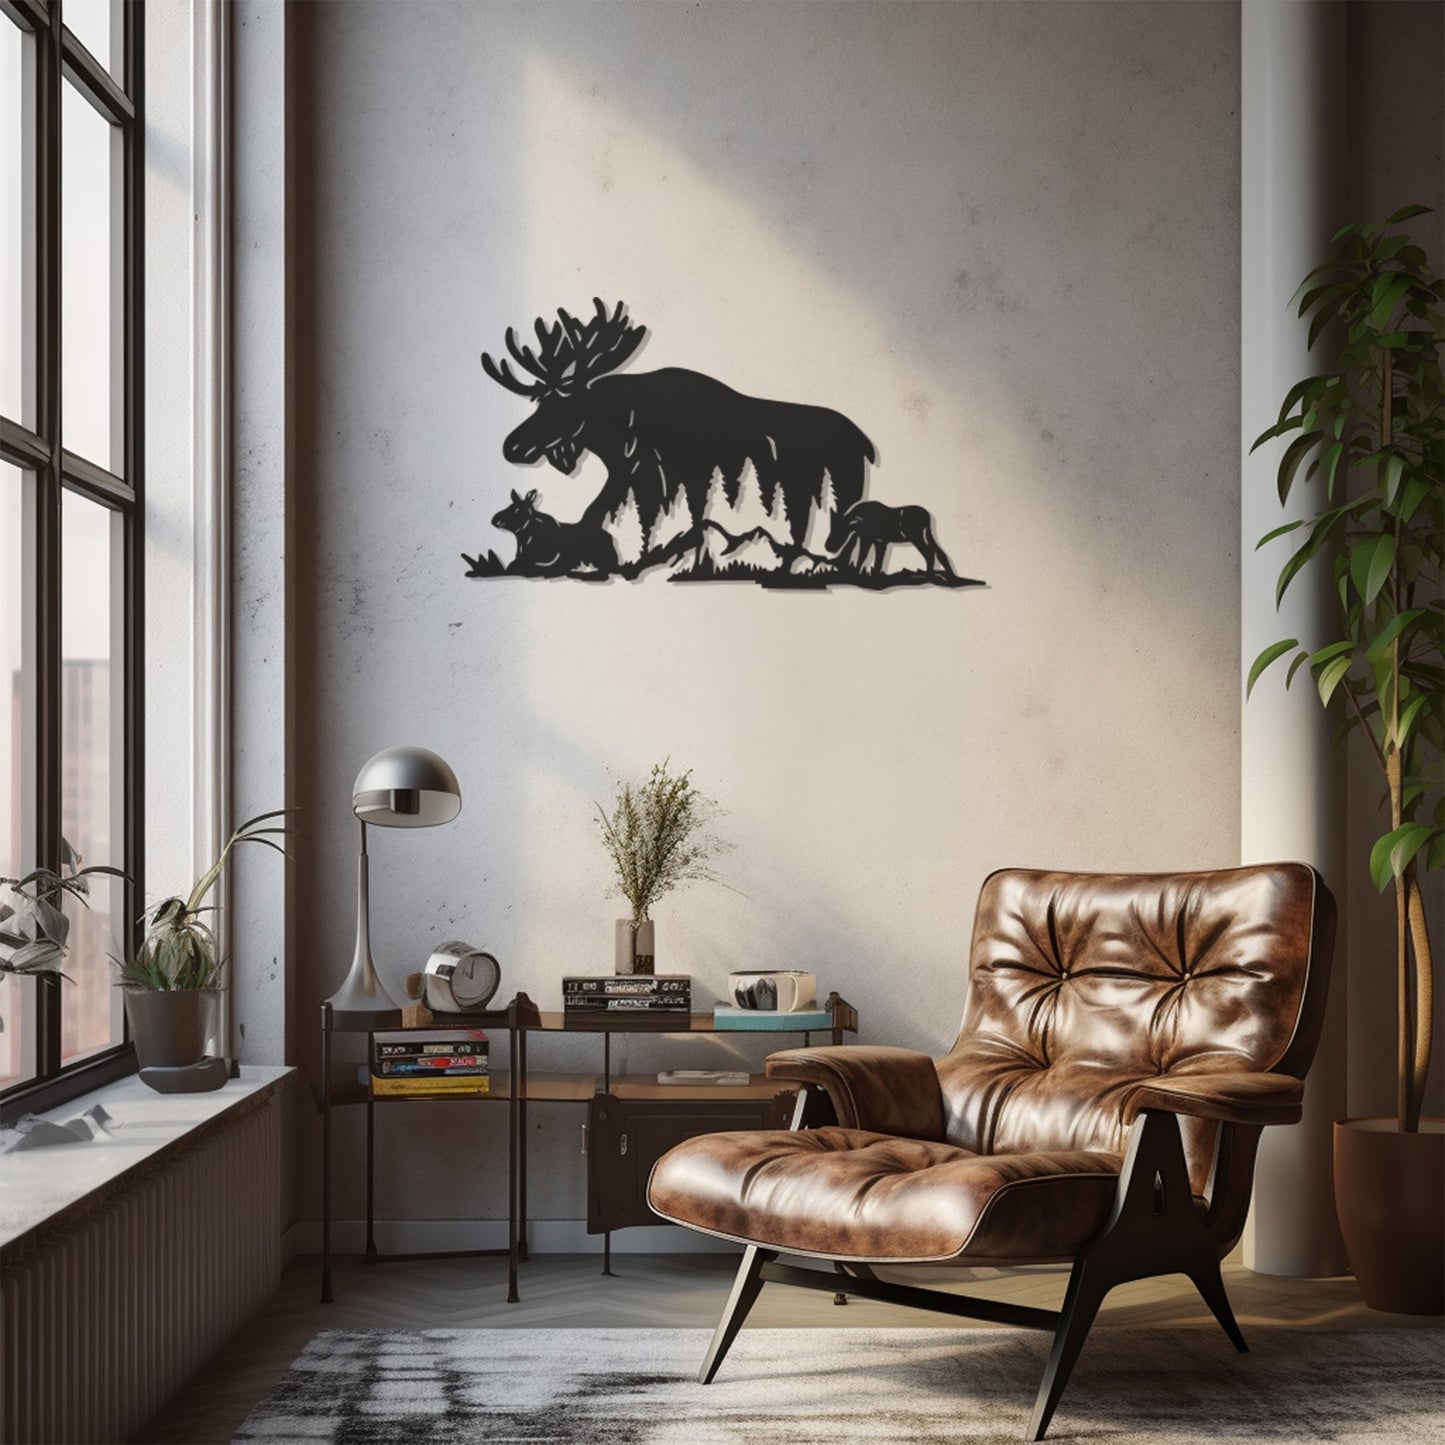 Silhouette Metal Wall Decor With Deer And Fawns In The Mountain